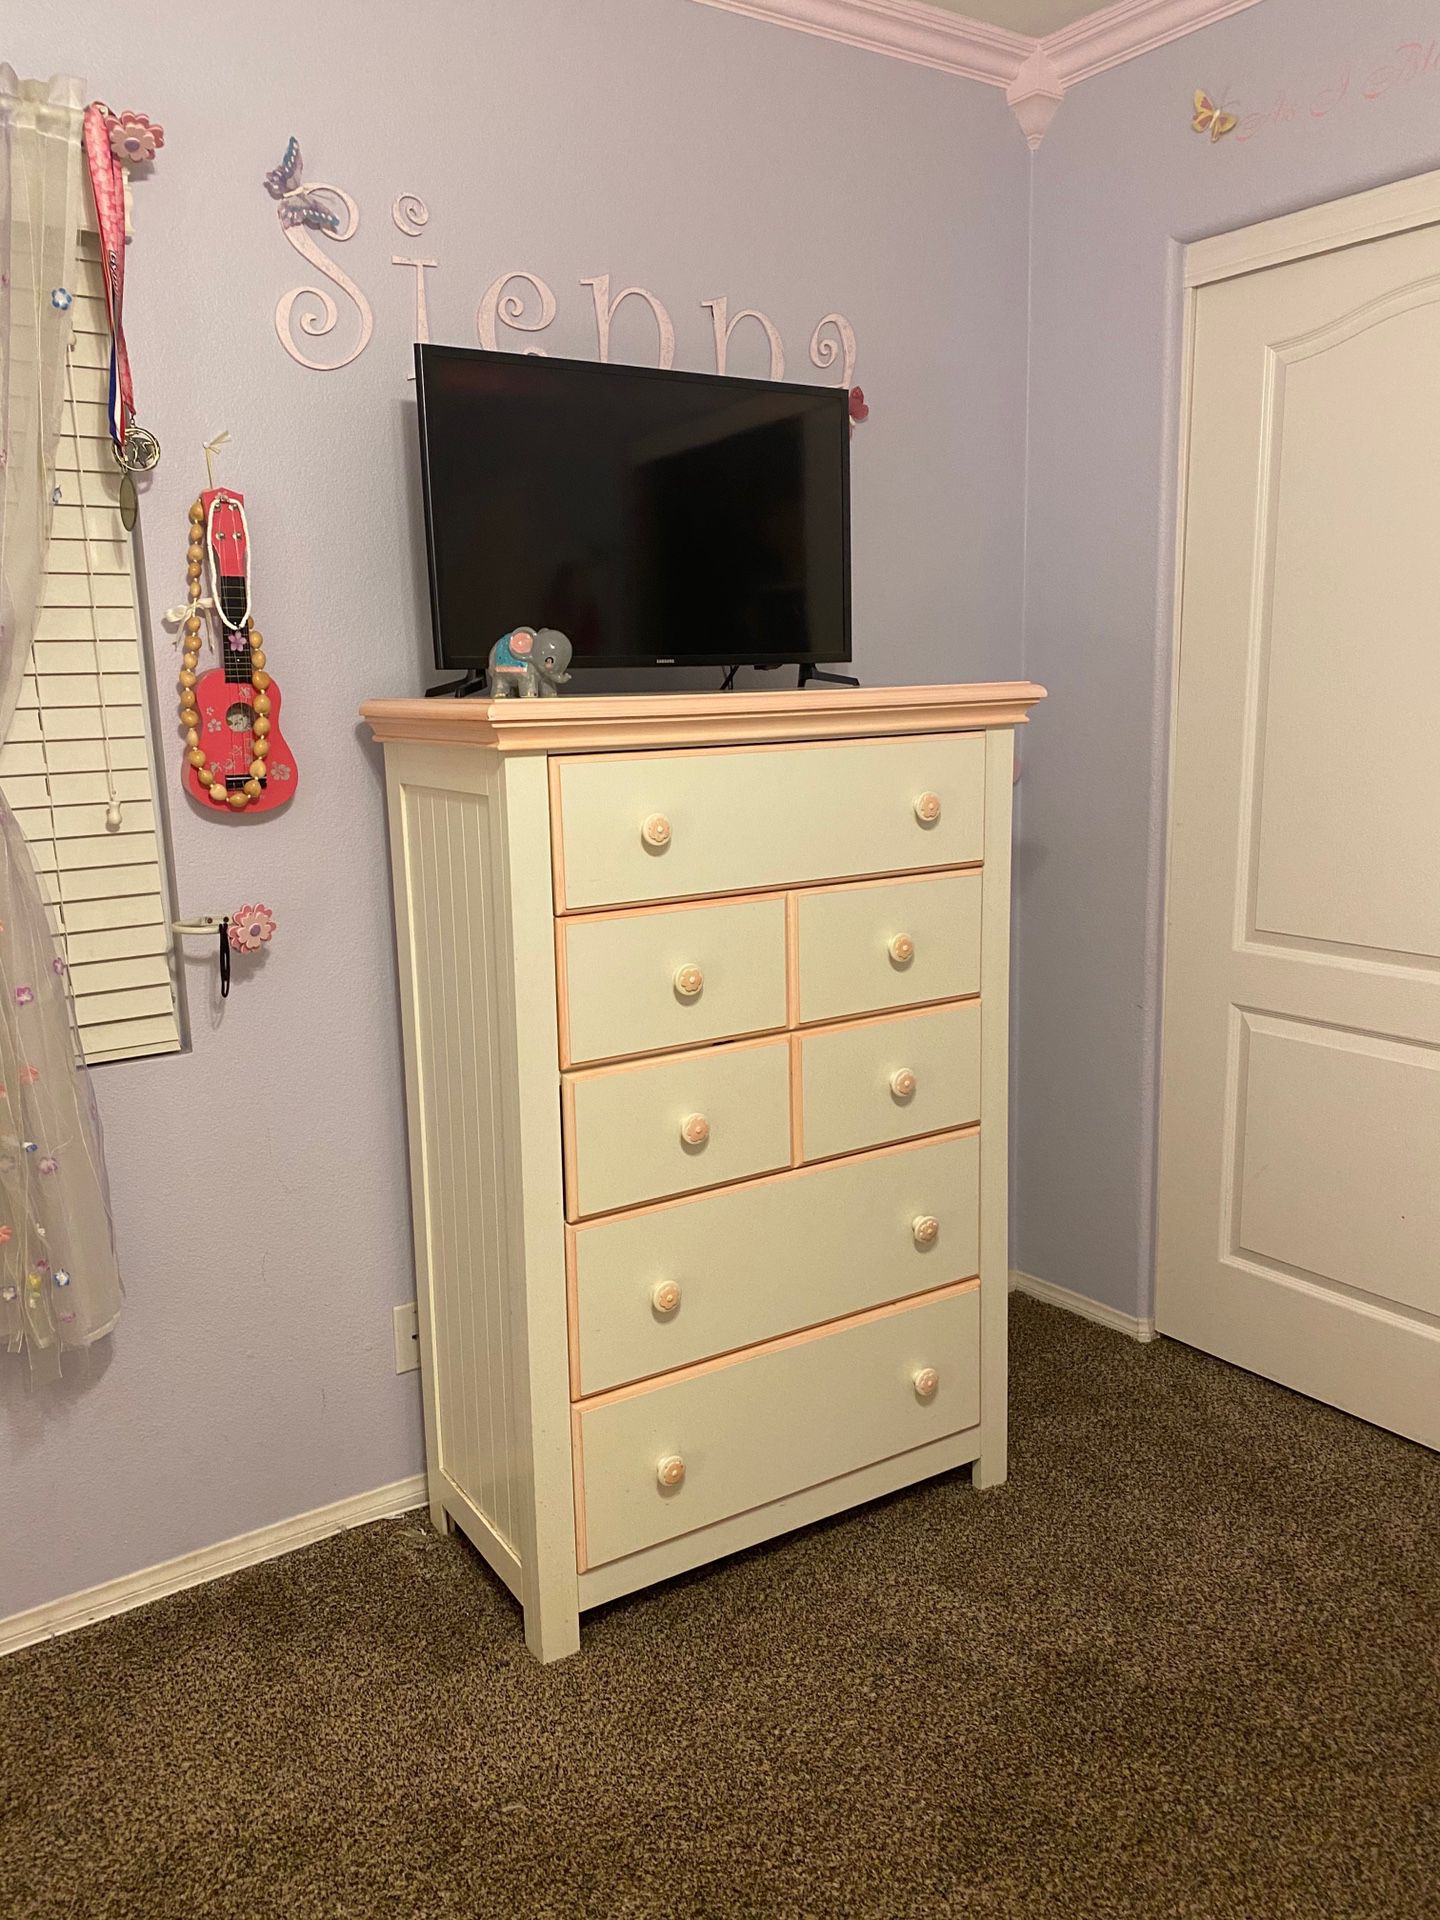 Girl bedroom set. Full size bed. It includes a new trundle to go under bed and a used box spring. Paid $1200. Great buy